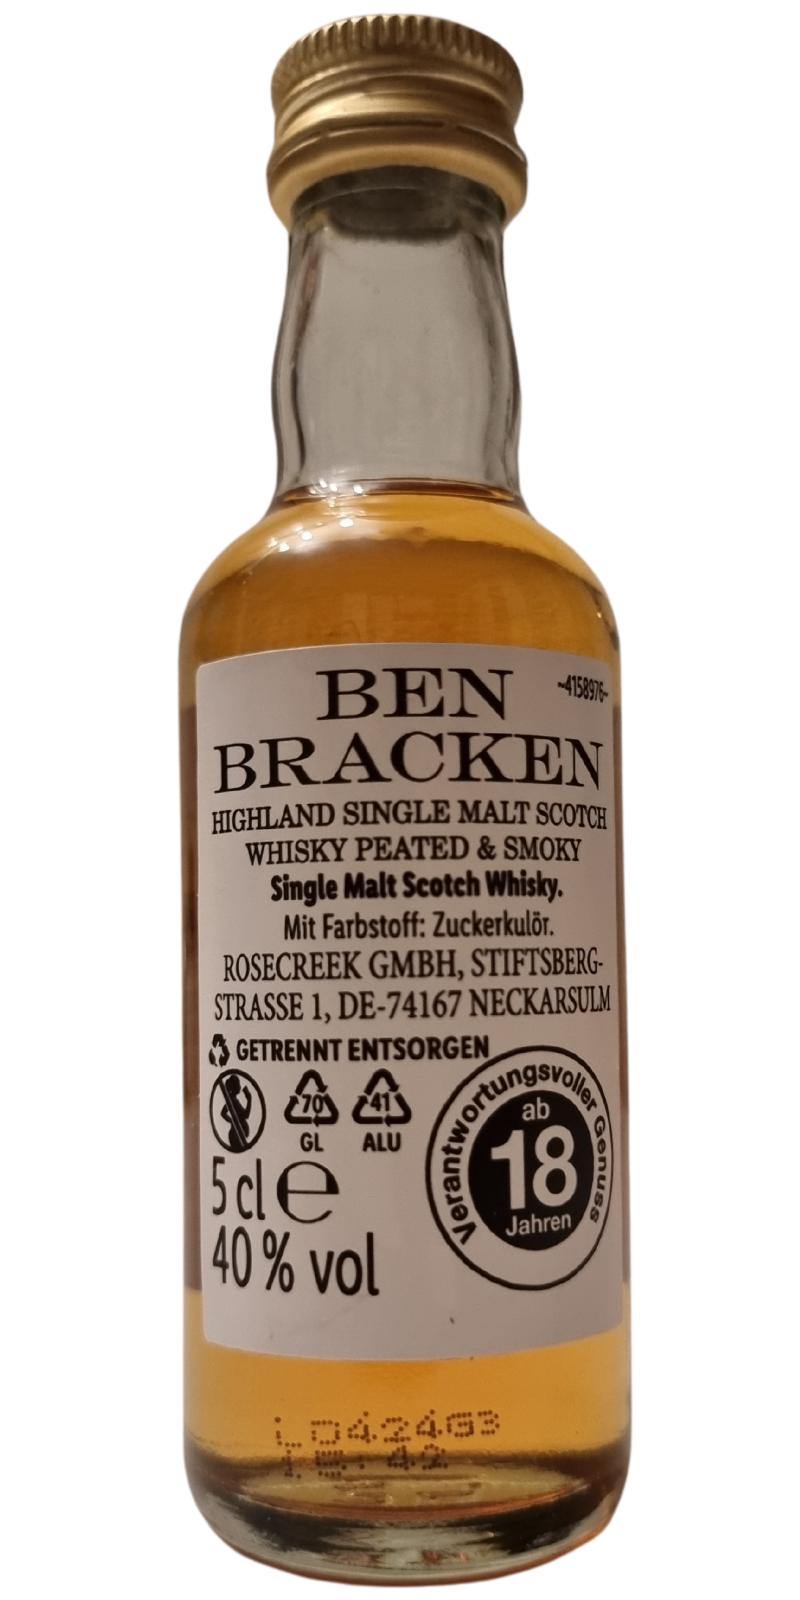 Ben Bracken Peated & Smoky - Ratings - reviews Cd and Whiskybase